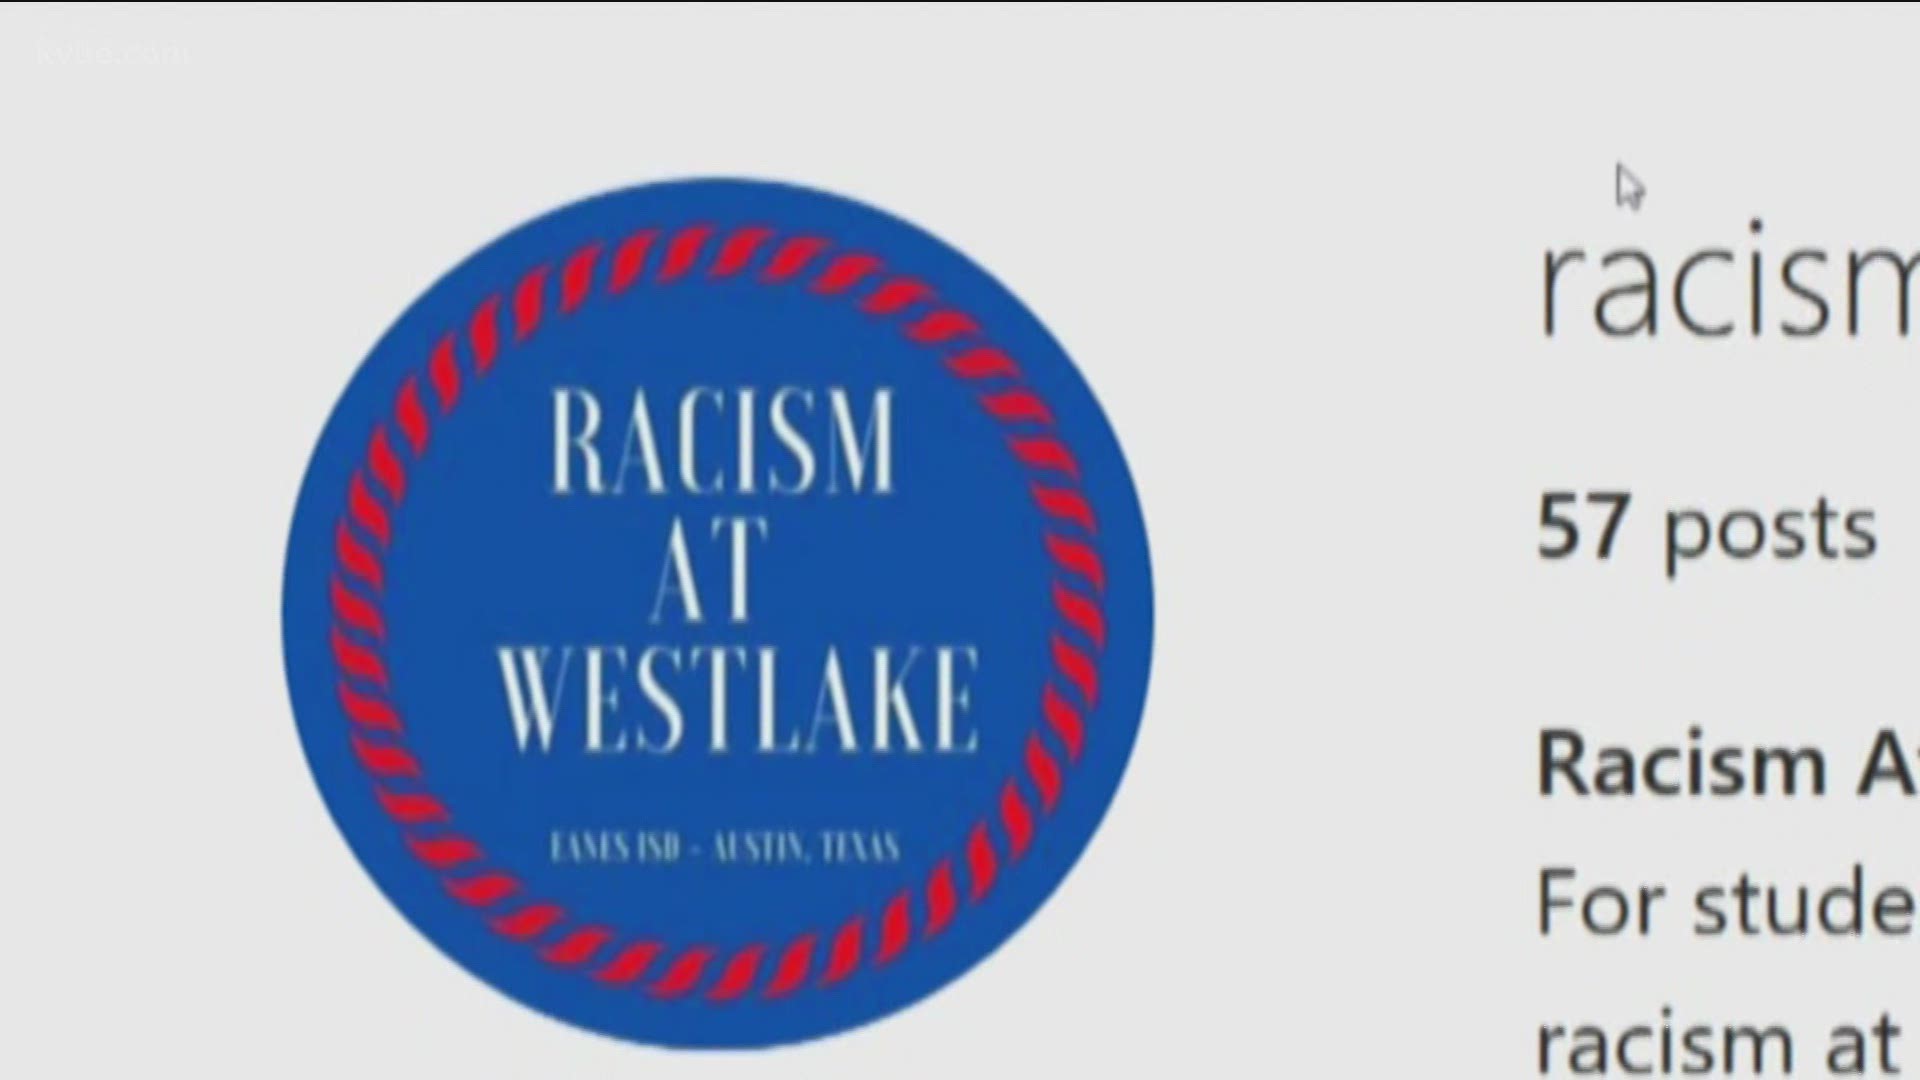 The Instagram account "Racism at Westlake" is full of stories from former students highlighting their experiences with racism at Westlake High School.